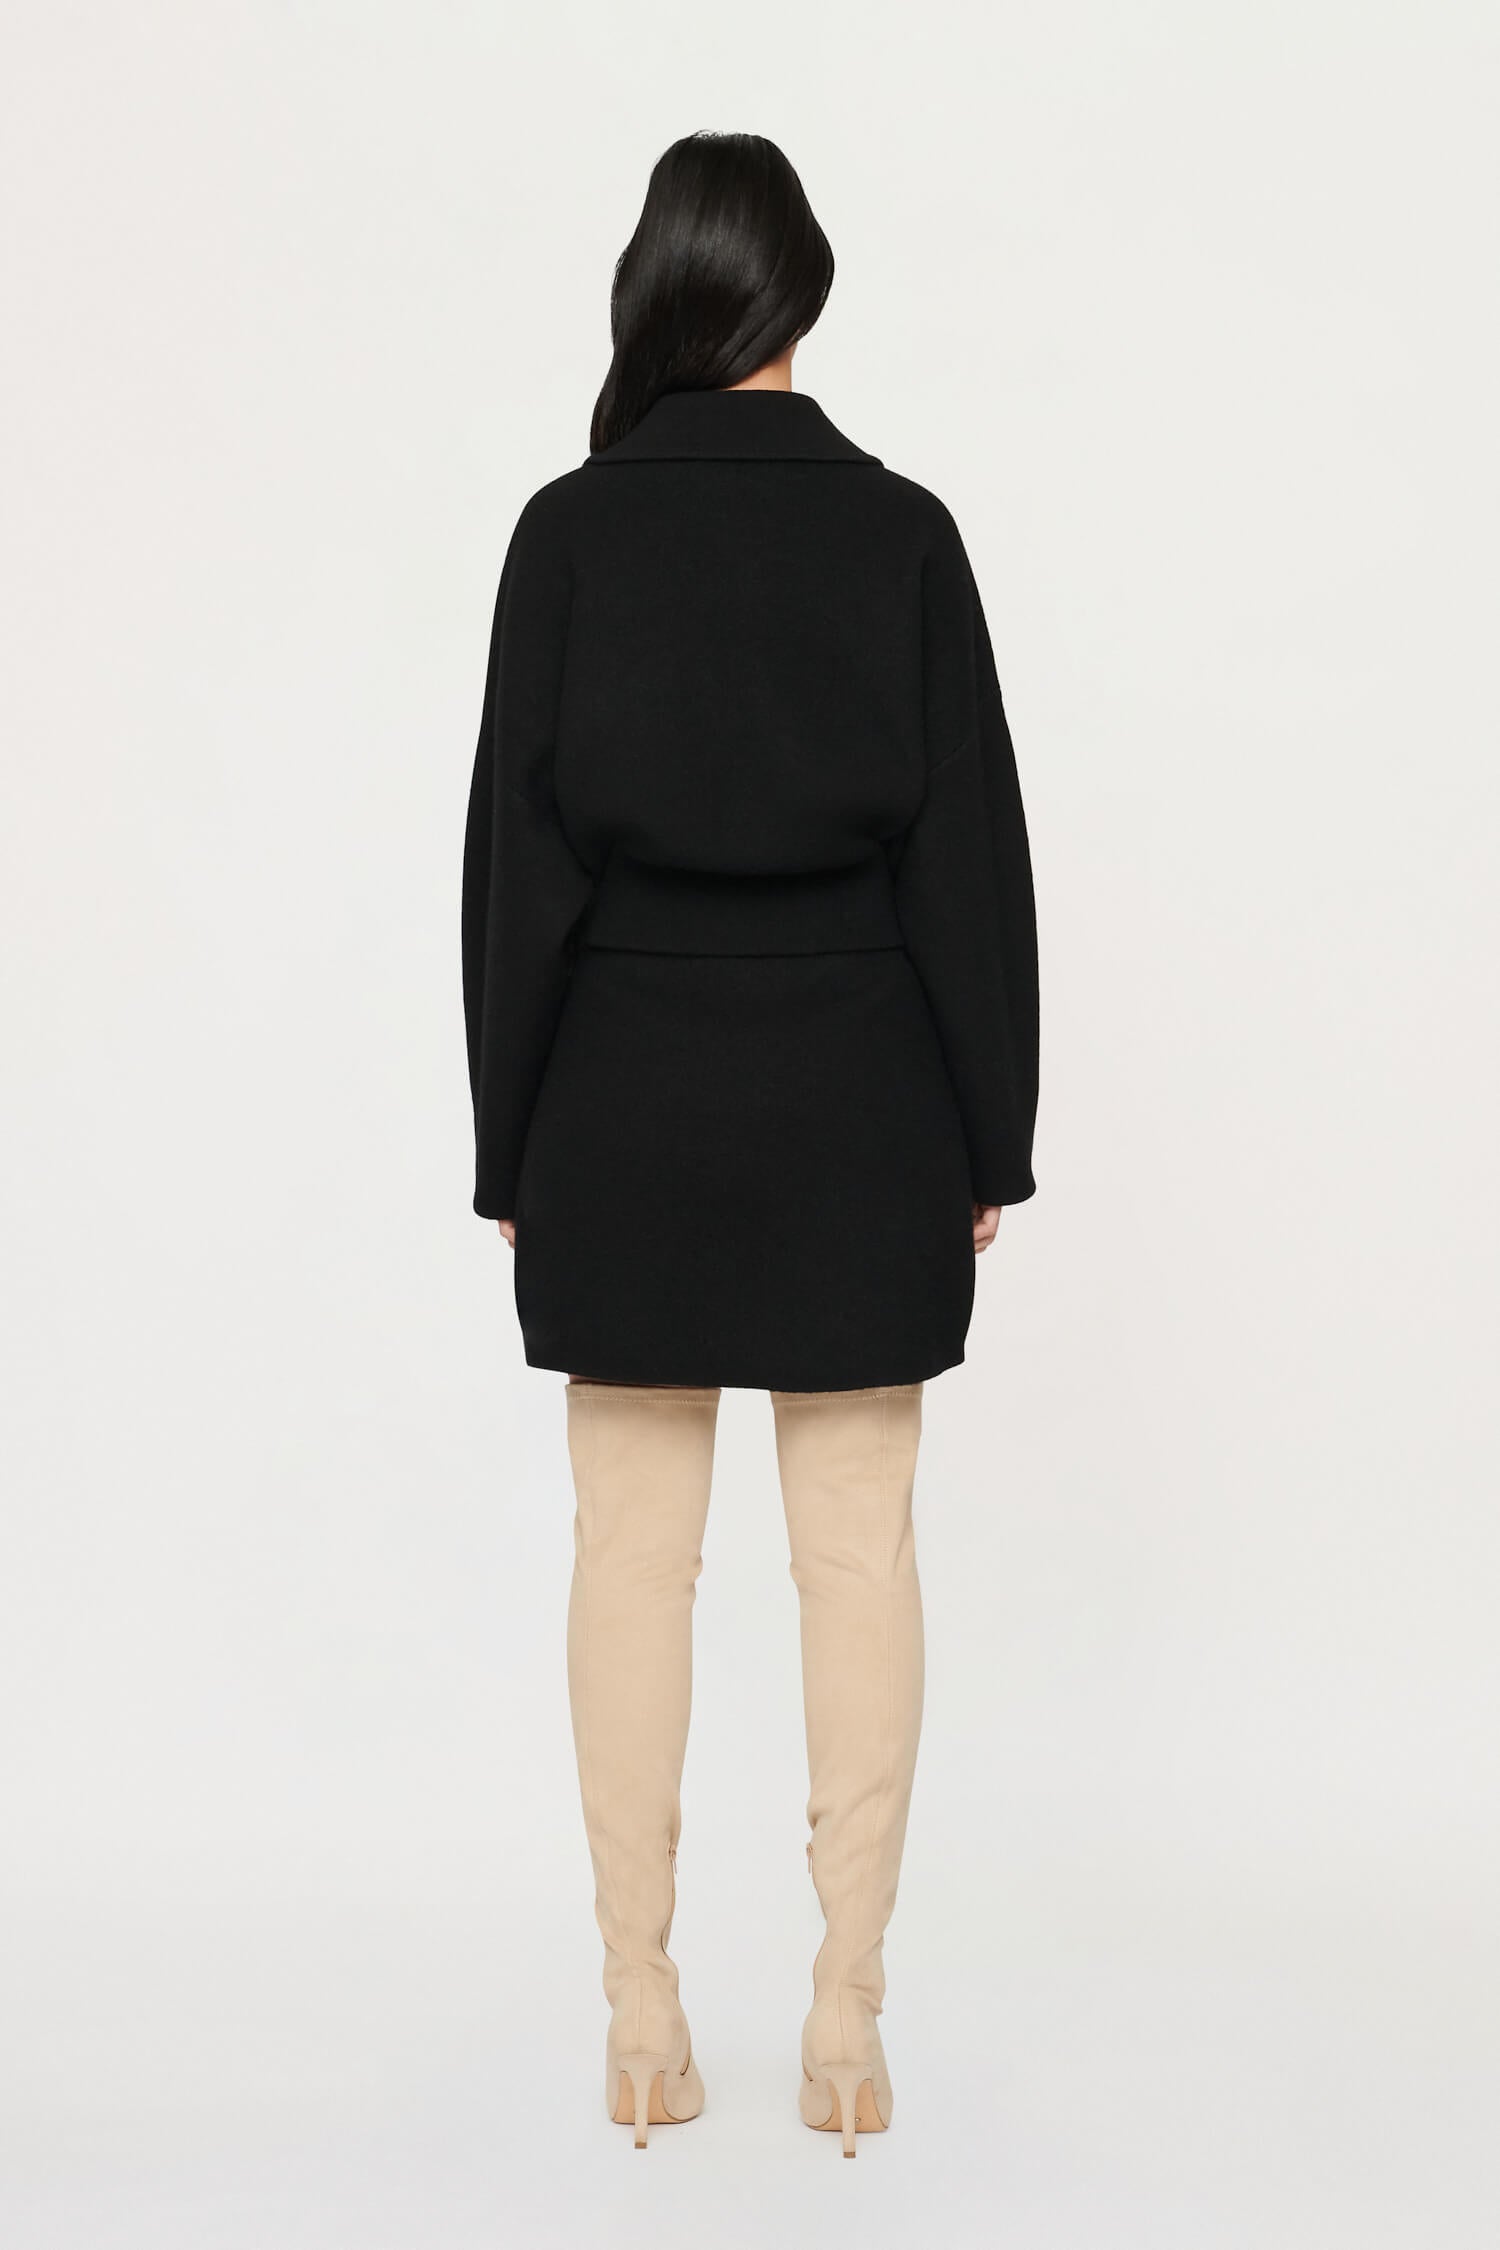 Clea Mia Boiled Wool Knit Skirt in Black available at TNT The New Trend Australia.